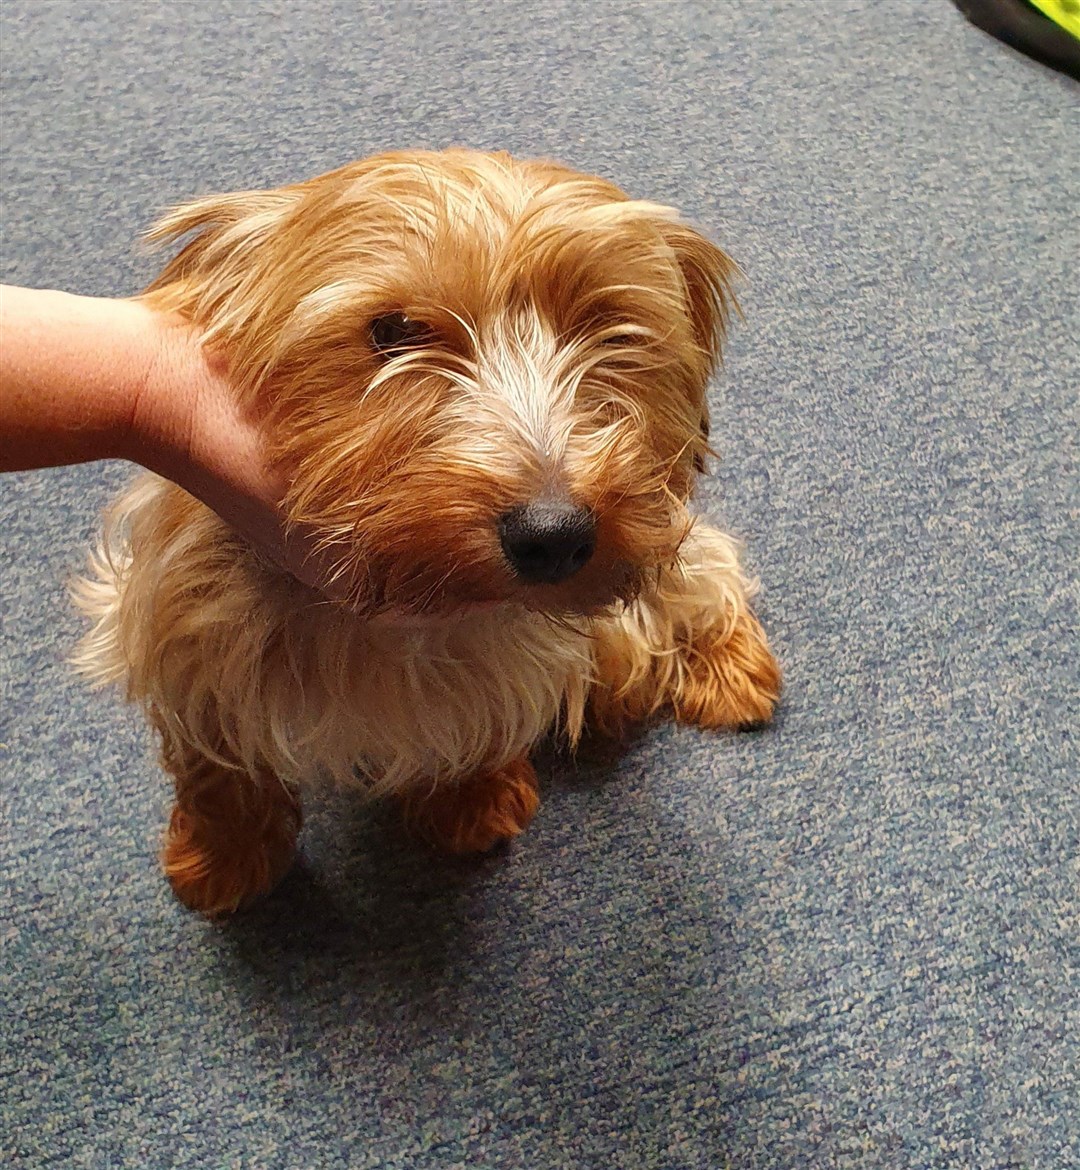 The Yorkshire Terrier has been reunited with its owner.